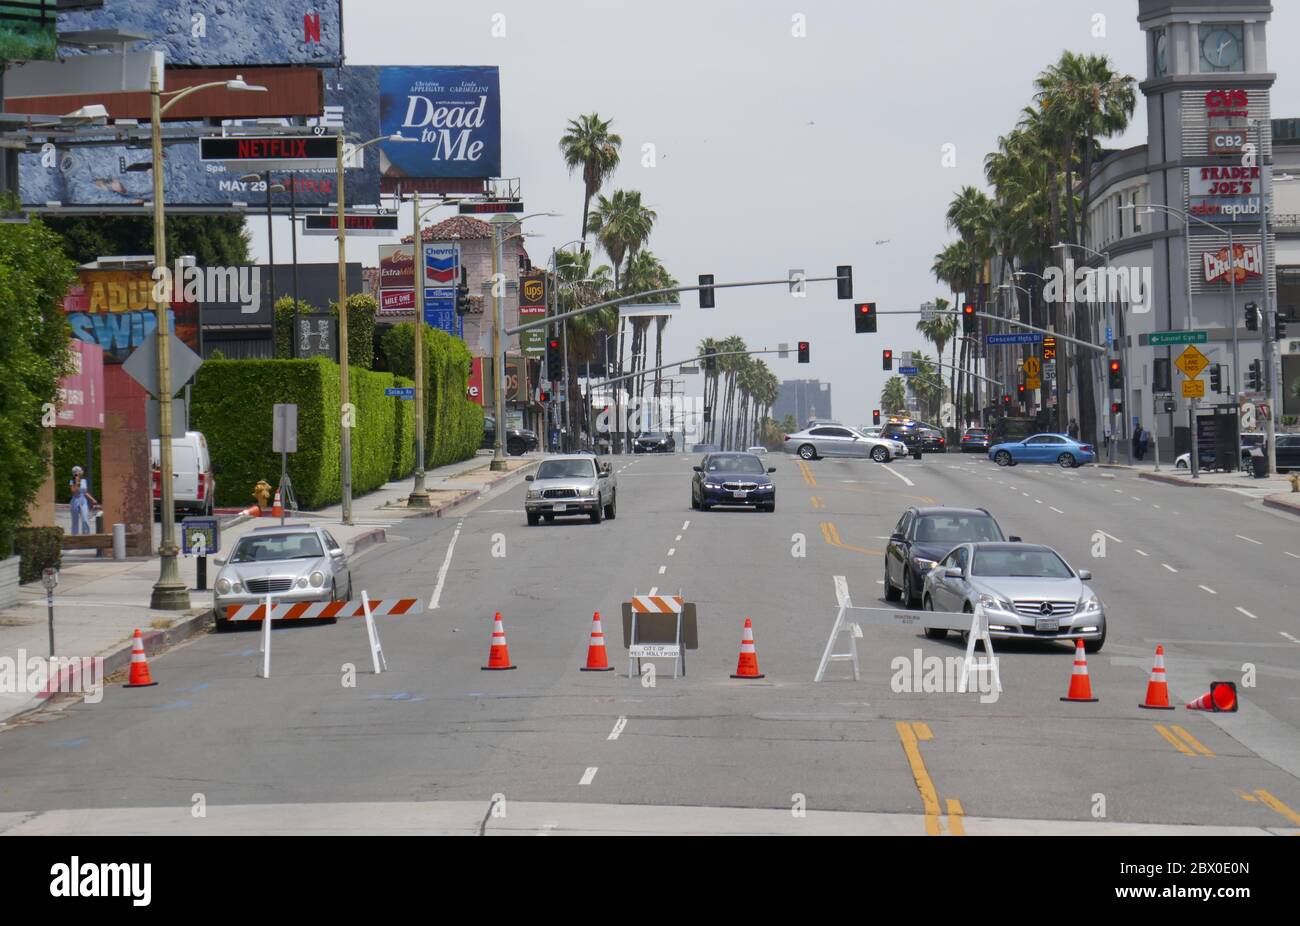 West Hollywood, California, USA 2nd June 2020 A general view of atmosphere of blocked off Sunset Blvd during the Coronavirus Covid-19 Pandemic as Black Lives Matter protests continue on June 2, 2020 in West Hollywood, California, USA. Photo by Barry King/Alamy Stock Photo Stock Photo